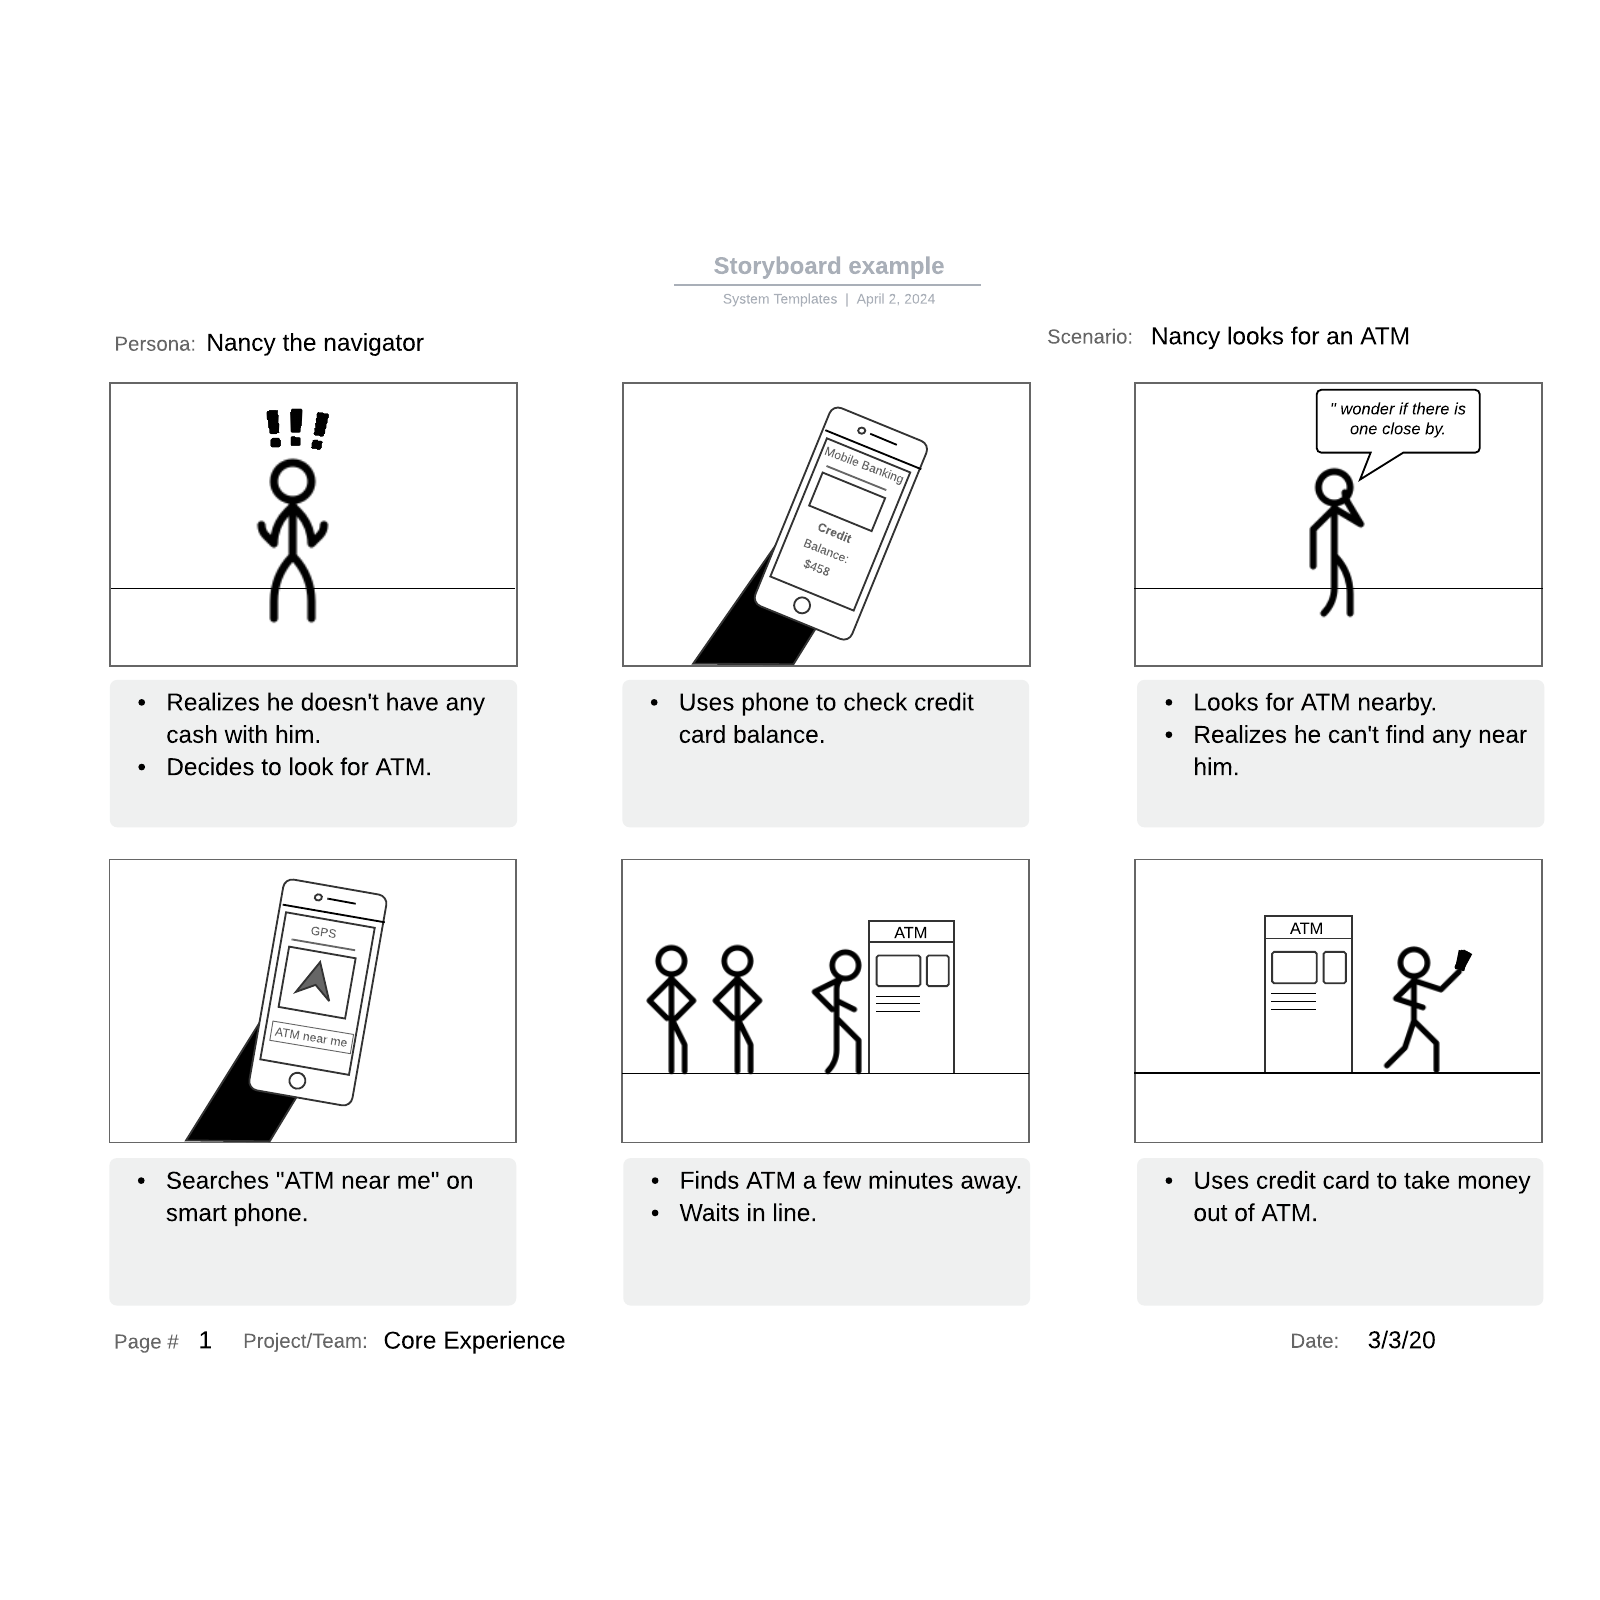 Storyboard example example